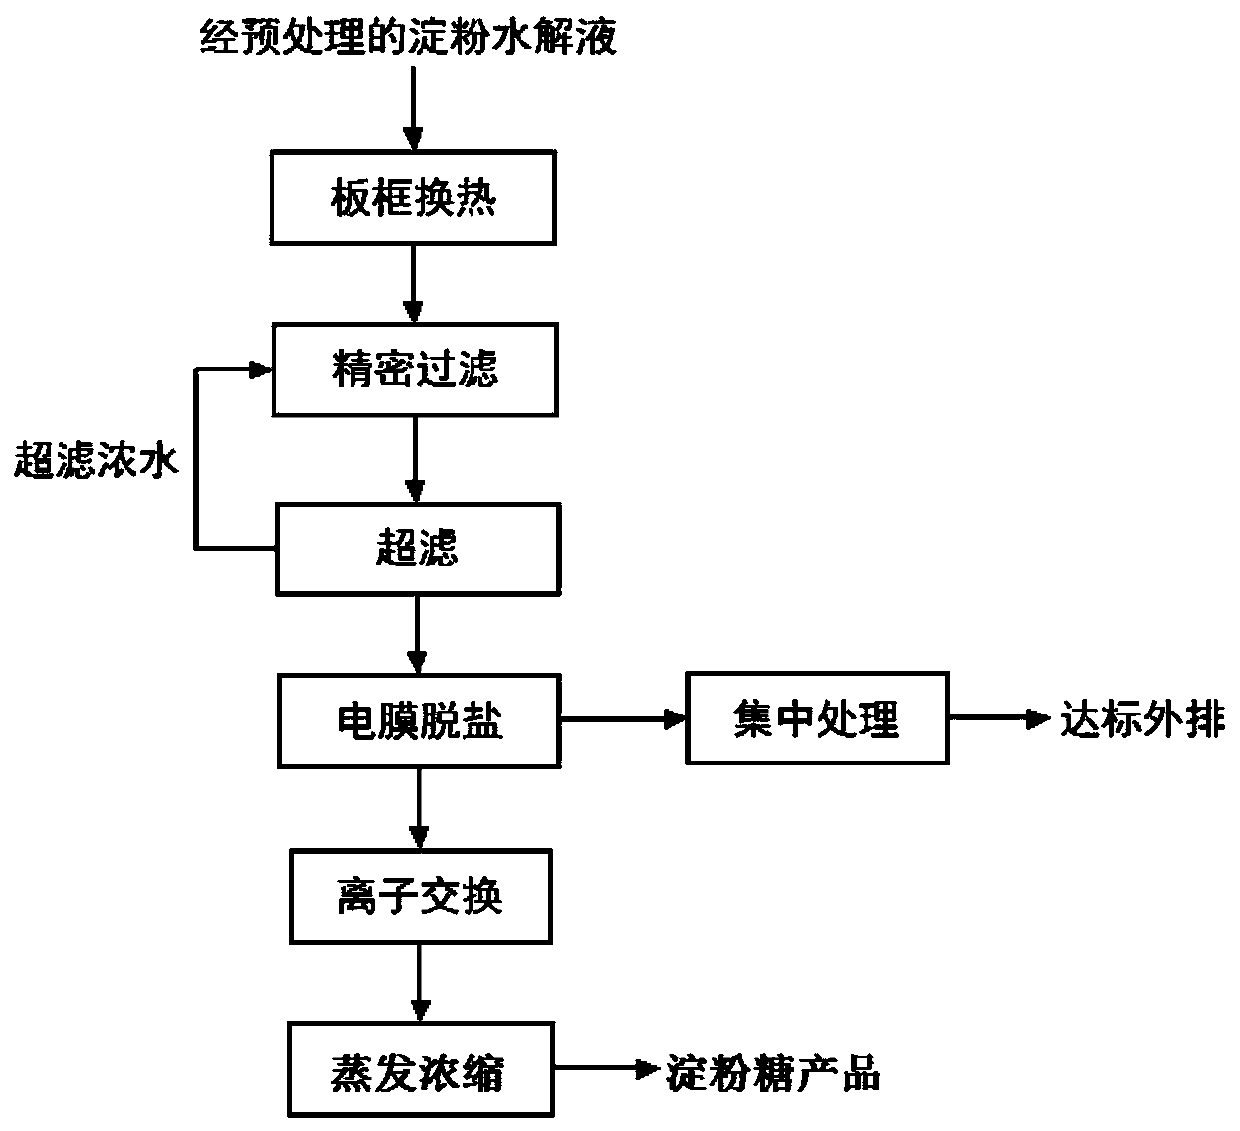 Combined process method applied to desalination of starch hydrolysate